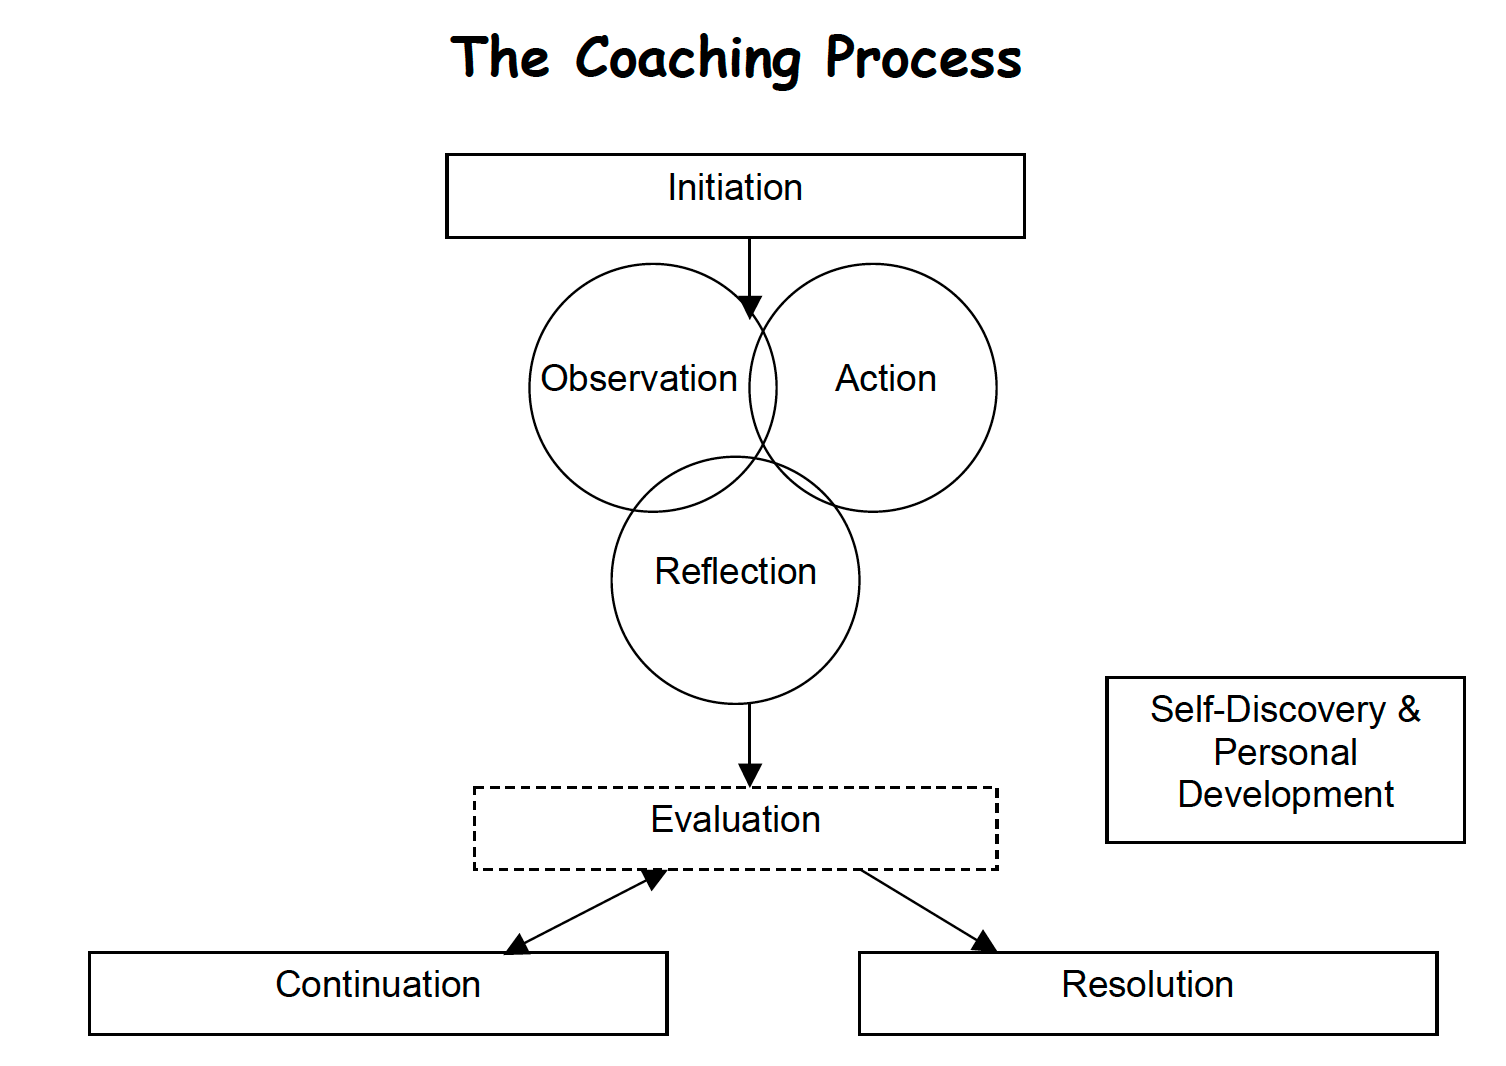 "Initiation leads to observation, action and reflection. Then goes to evaluation. Continuation goes back and forth between evaluation. Evaluation also goes towards resolution. Self-discovery and personal development is a square by itself on this flowchart to show this is another way to call this whole process."